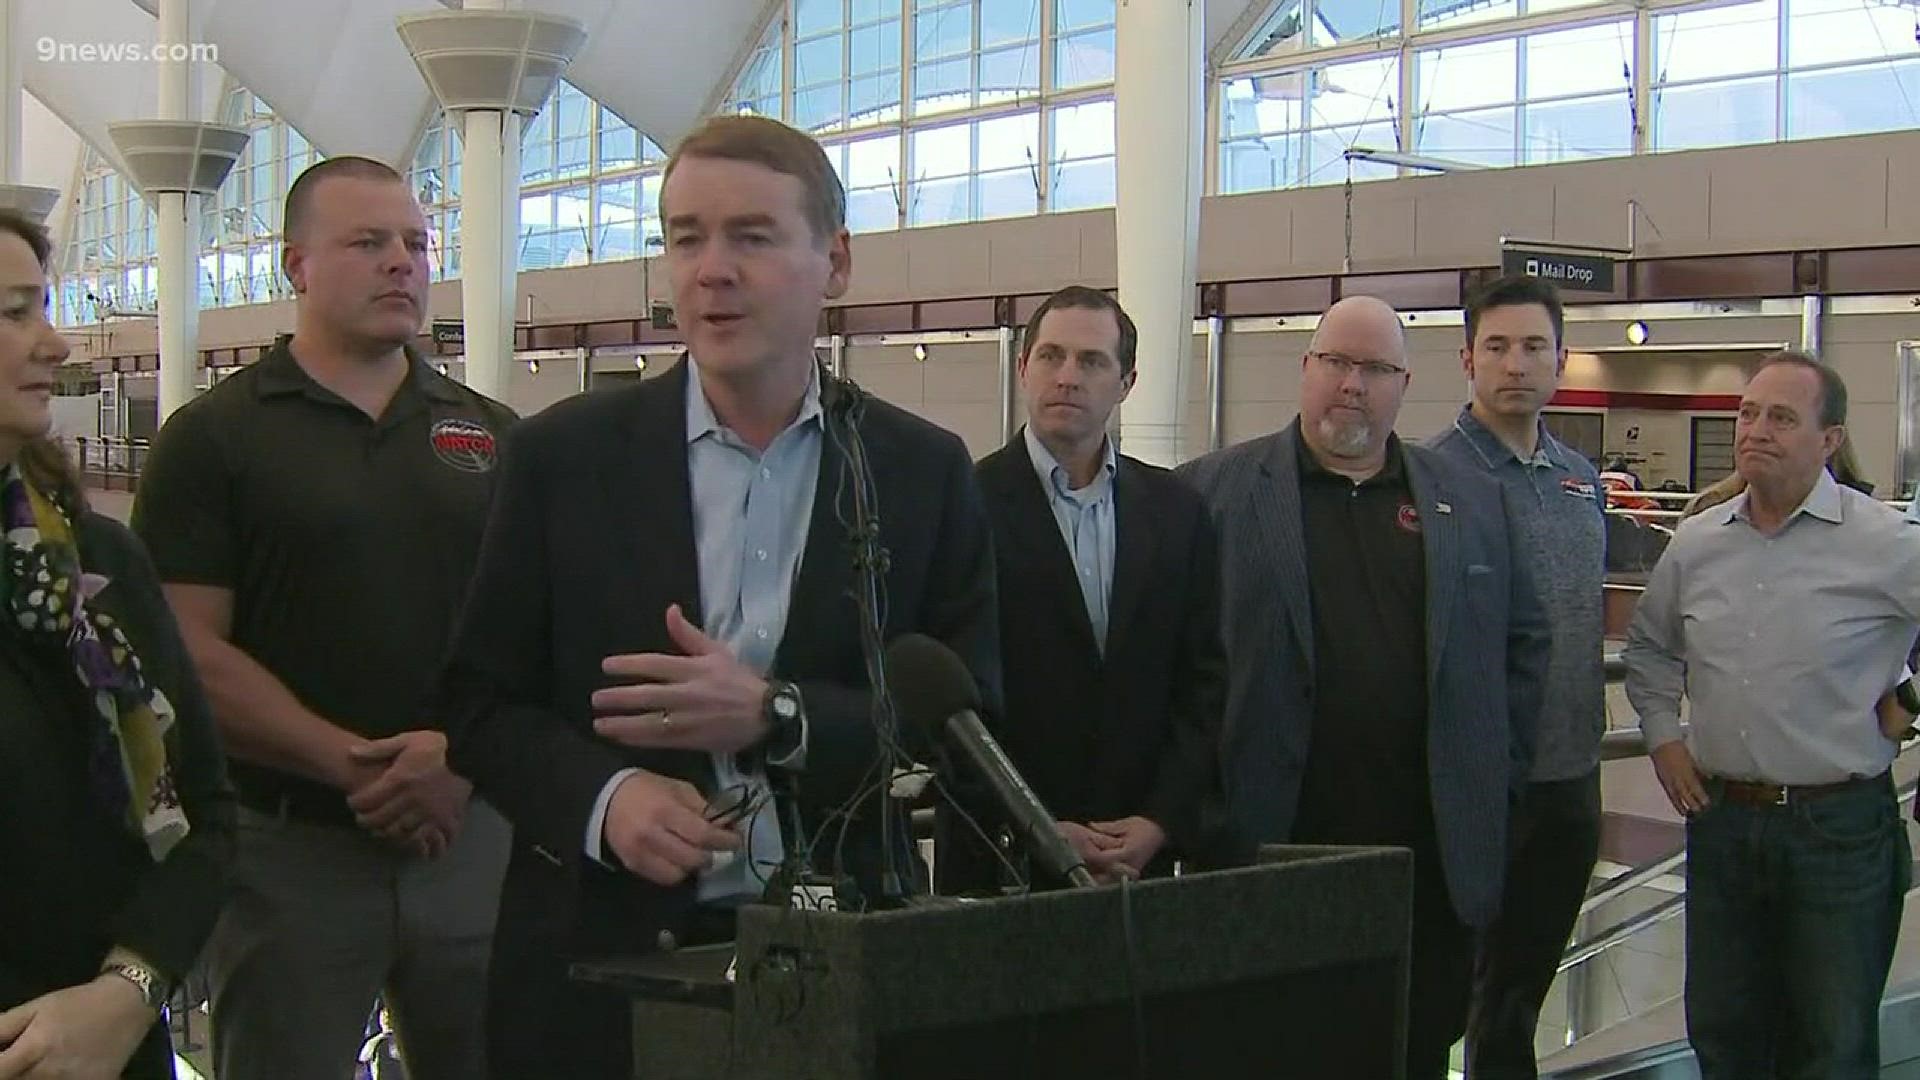 Sen. Michael Bennet and Rep. Diana DeGette speak at DIA about government shutdown on Monday, Jan. 14, 2019.